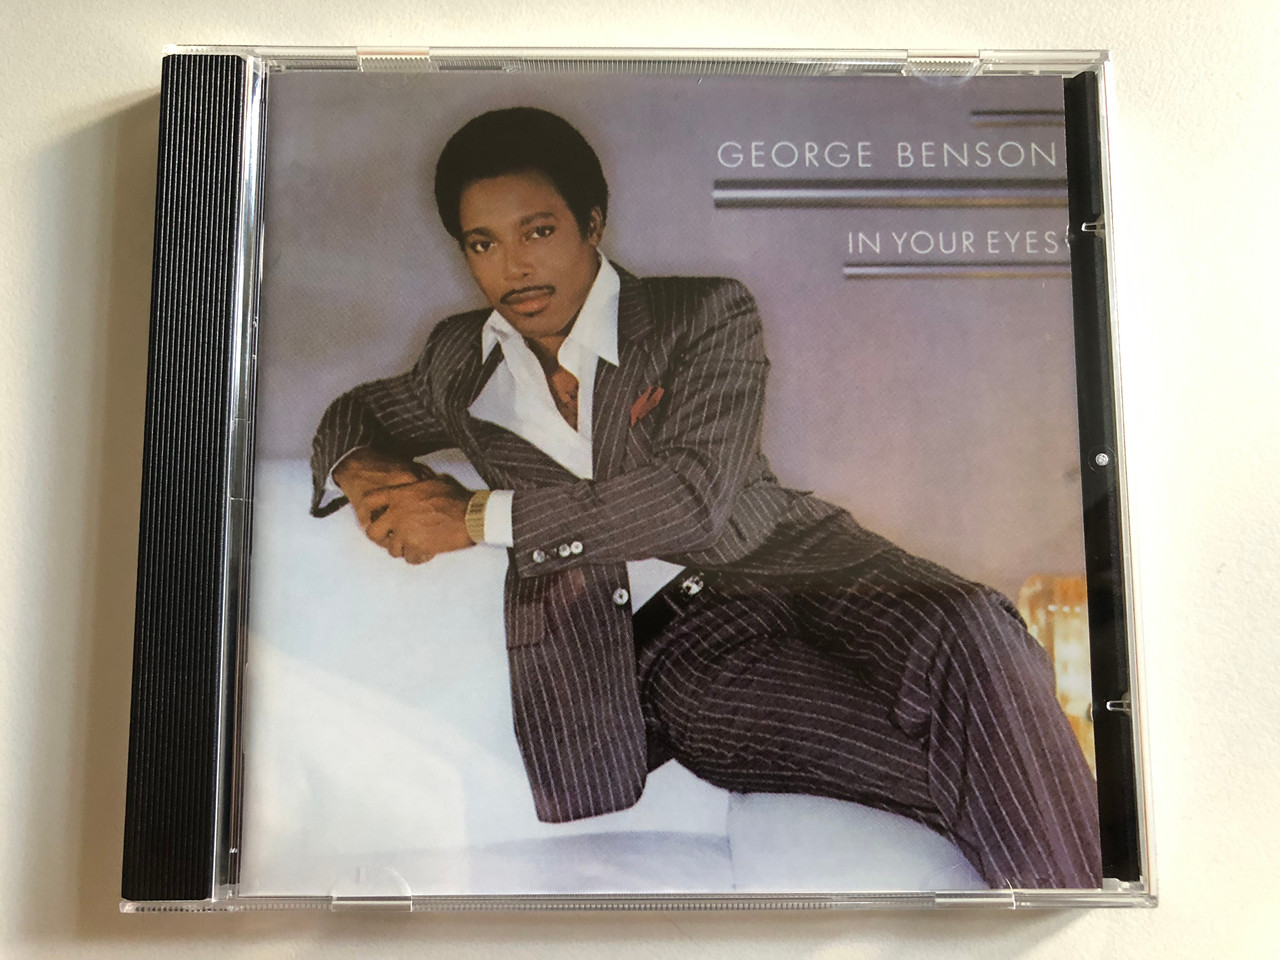 https://cdn10.bigcommerce.com/s-62bdpkt7pb/products/0/images/313487/George_Benson_In_Your_Eyes_Warner_Bros._Records_Audio_CD_7599-23744-2_1__90687.1700844364.1280.1280.JPG?c=2